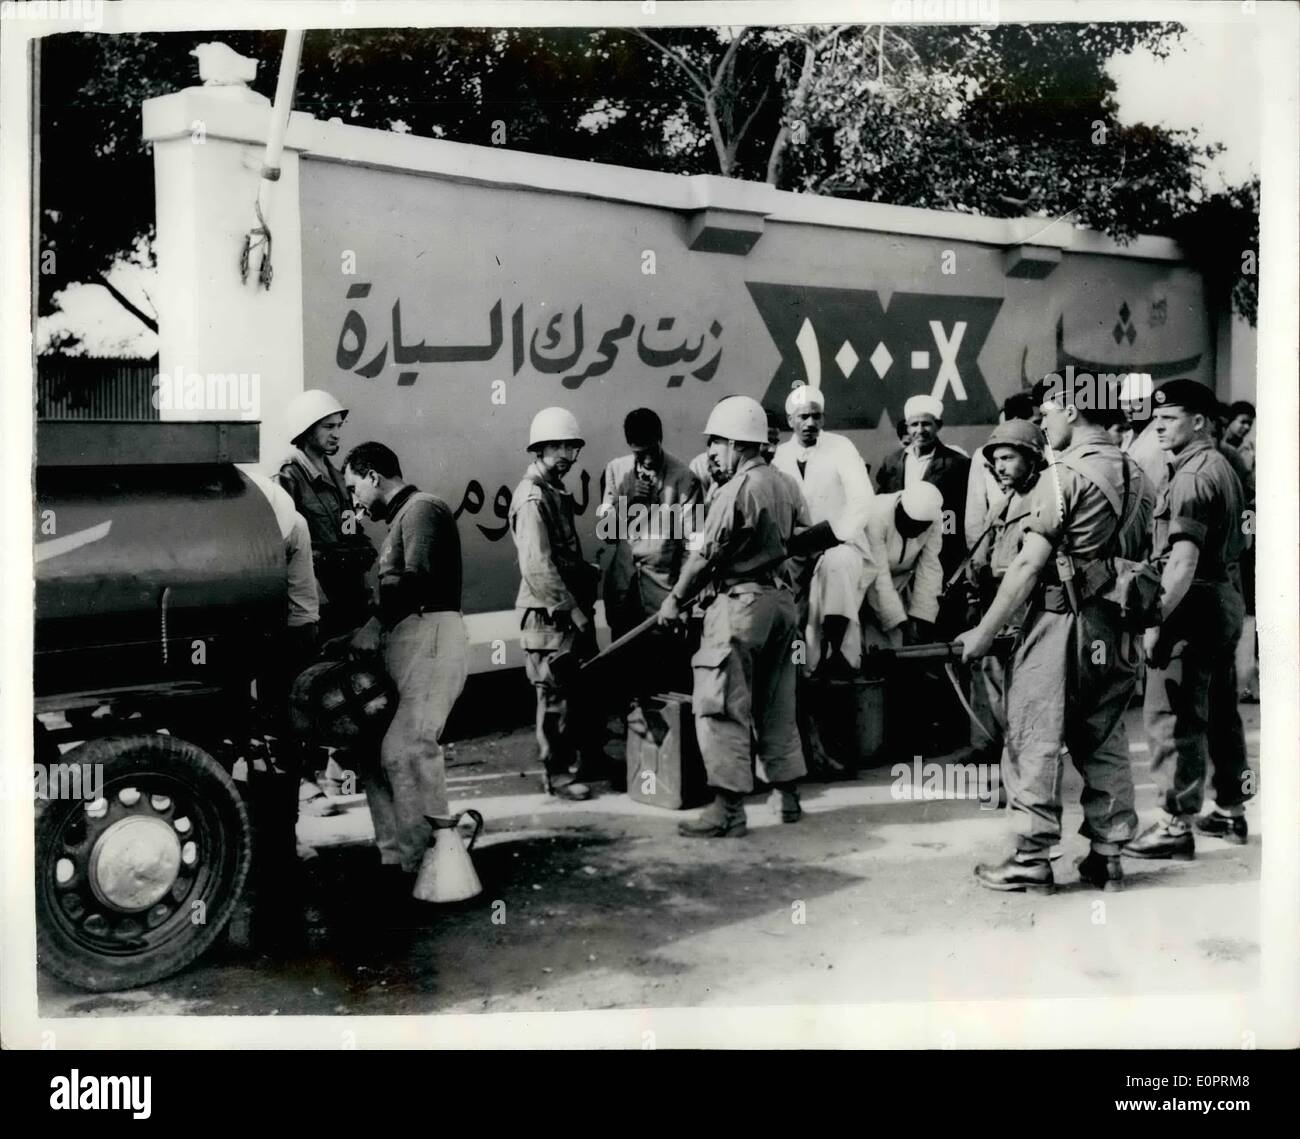 Nov. 11, 1956 - Latest Scenes from the Suez Area... Egyptians Queue for Fuel oil: While motorists in this country are experiencing difficulties in obtaining petrol- owing to the forthcoming petrol rationing - thanks to the Suez situation - the Egyptians are themselves feeling the pinch. They can be seen lining up every day - for kerosene - for cooking purposes. Photo Shows British and French troops supervising a queue of Egyptian at El Raswa on the outskirts of Port Said. The queue is for Kerosene fuel; oil. Stock Photo